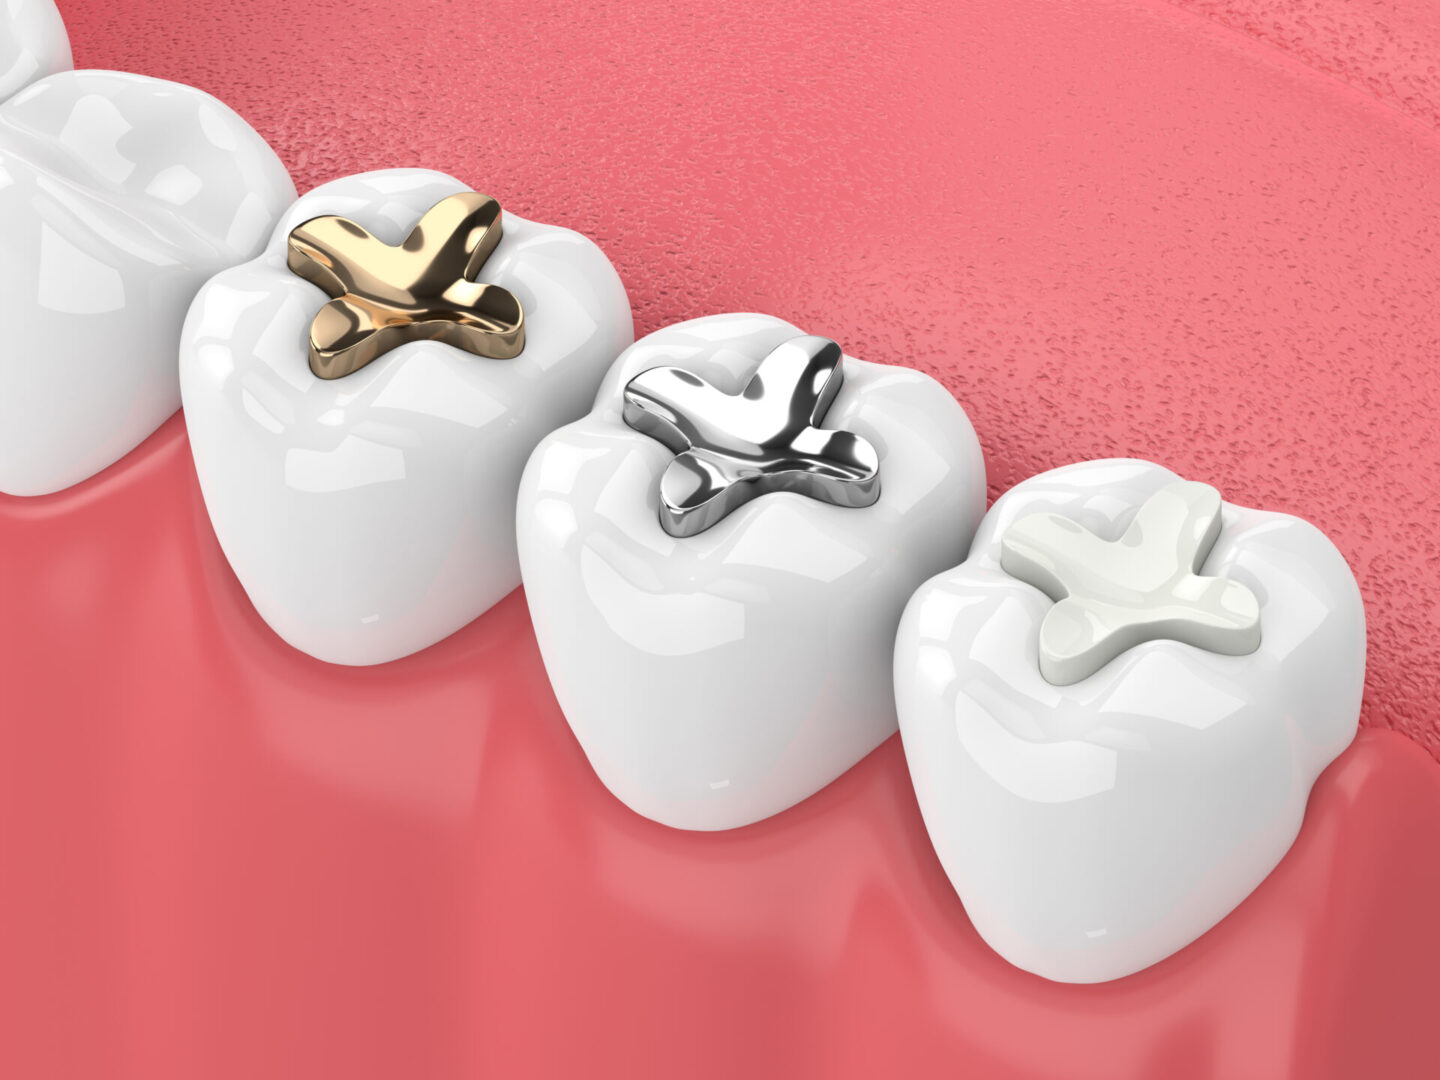 A row of teeth with different colored fillings.